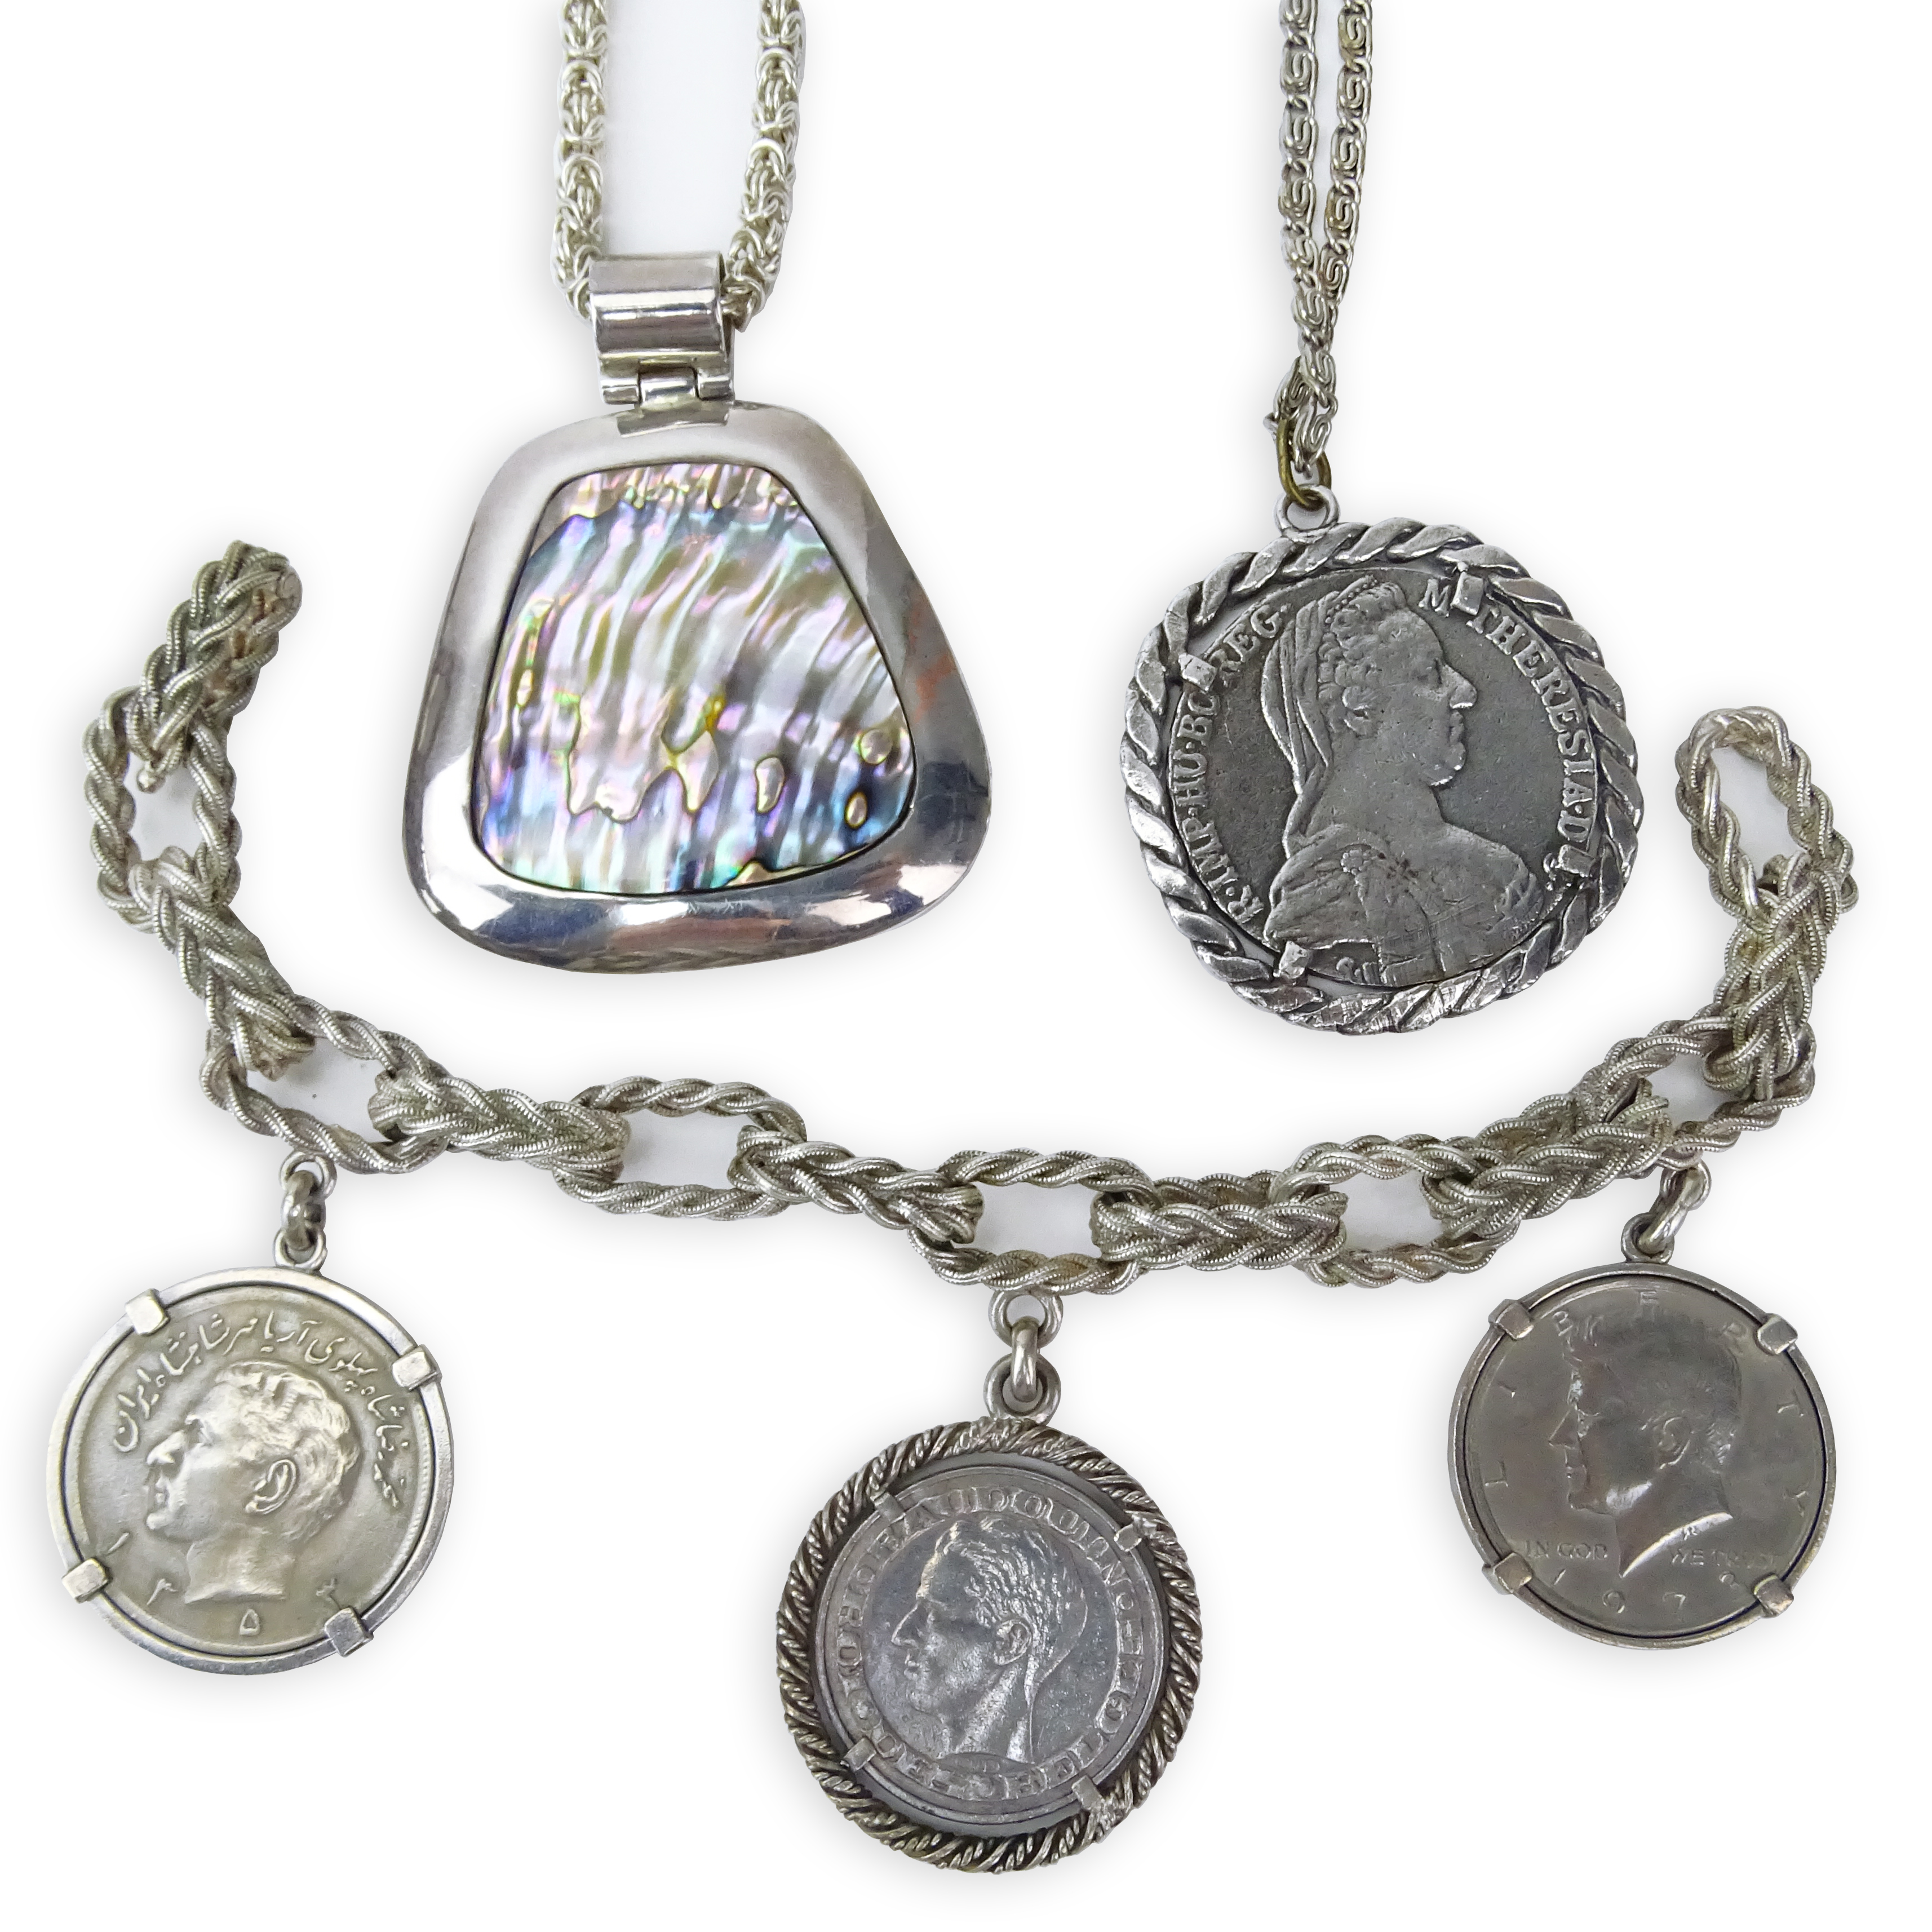 Vintage Abalone and 950 Silver Necklace, Coin Necklace and Coin Bracelet. 